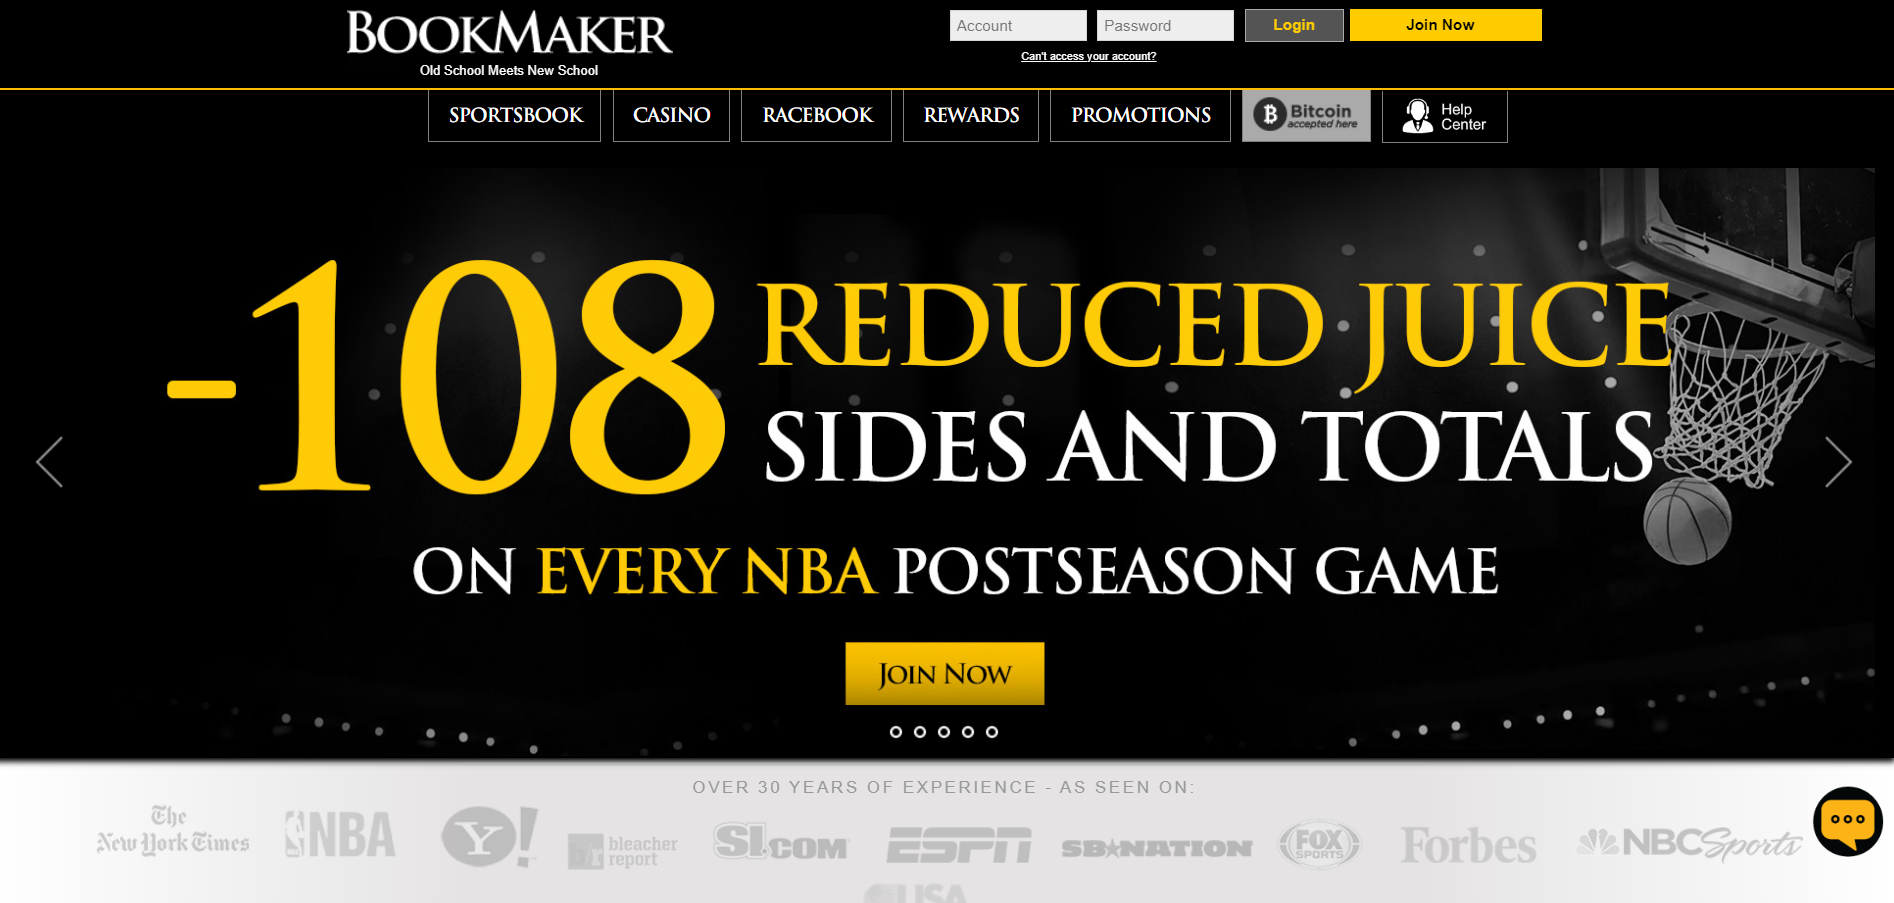 Bookmaker Sportsbook Review